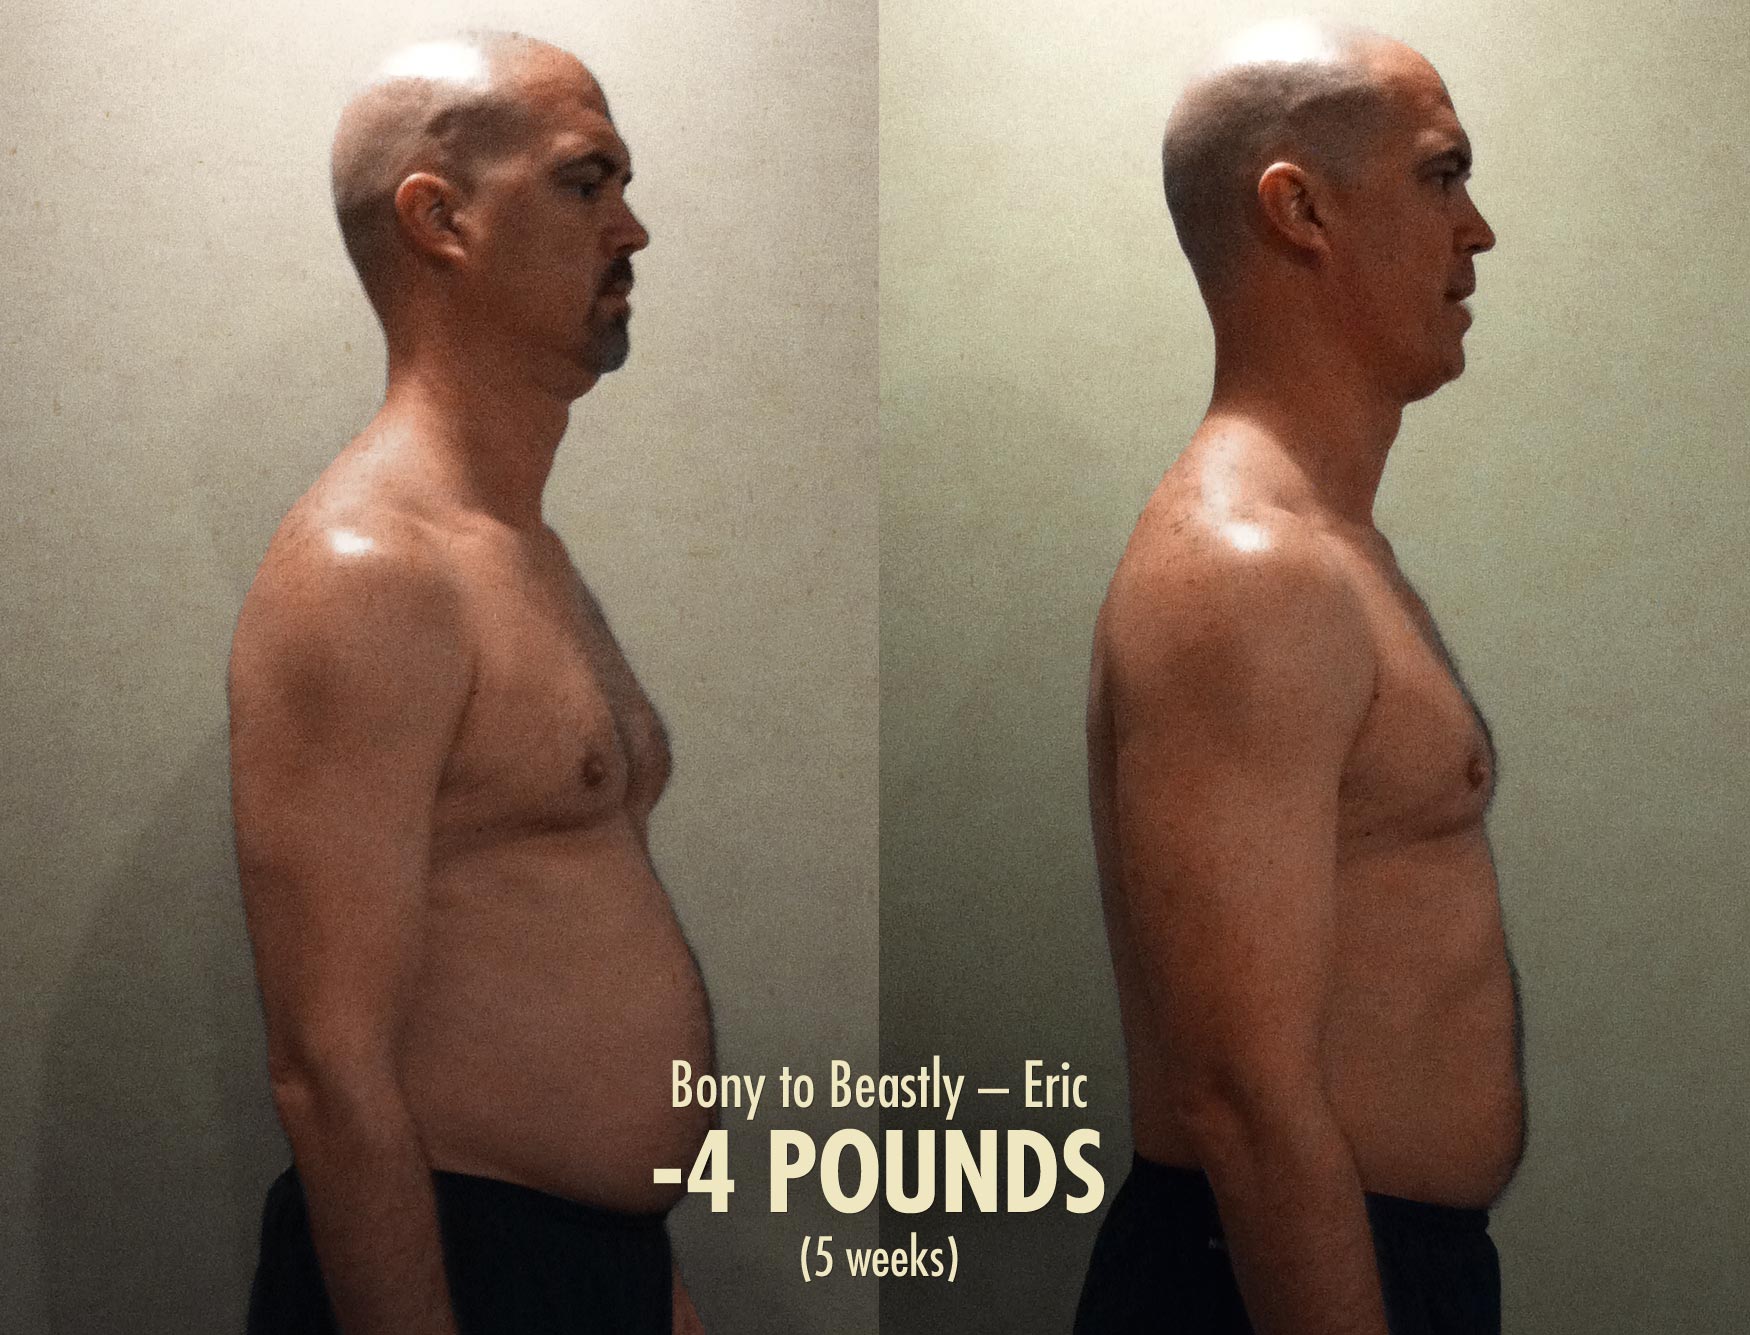 Before and after photo of a man building muscle and losing fat at 40 years old.